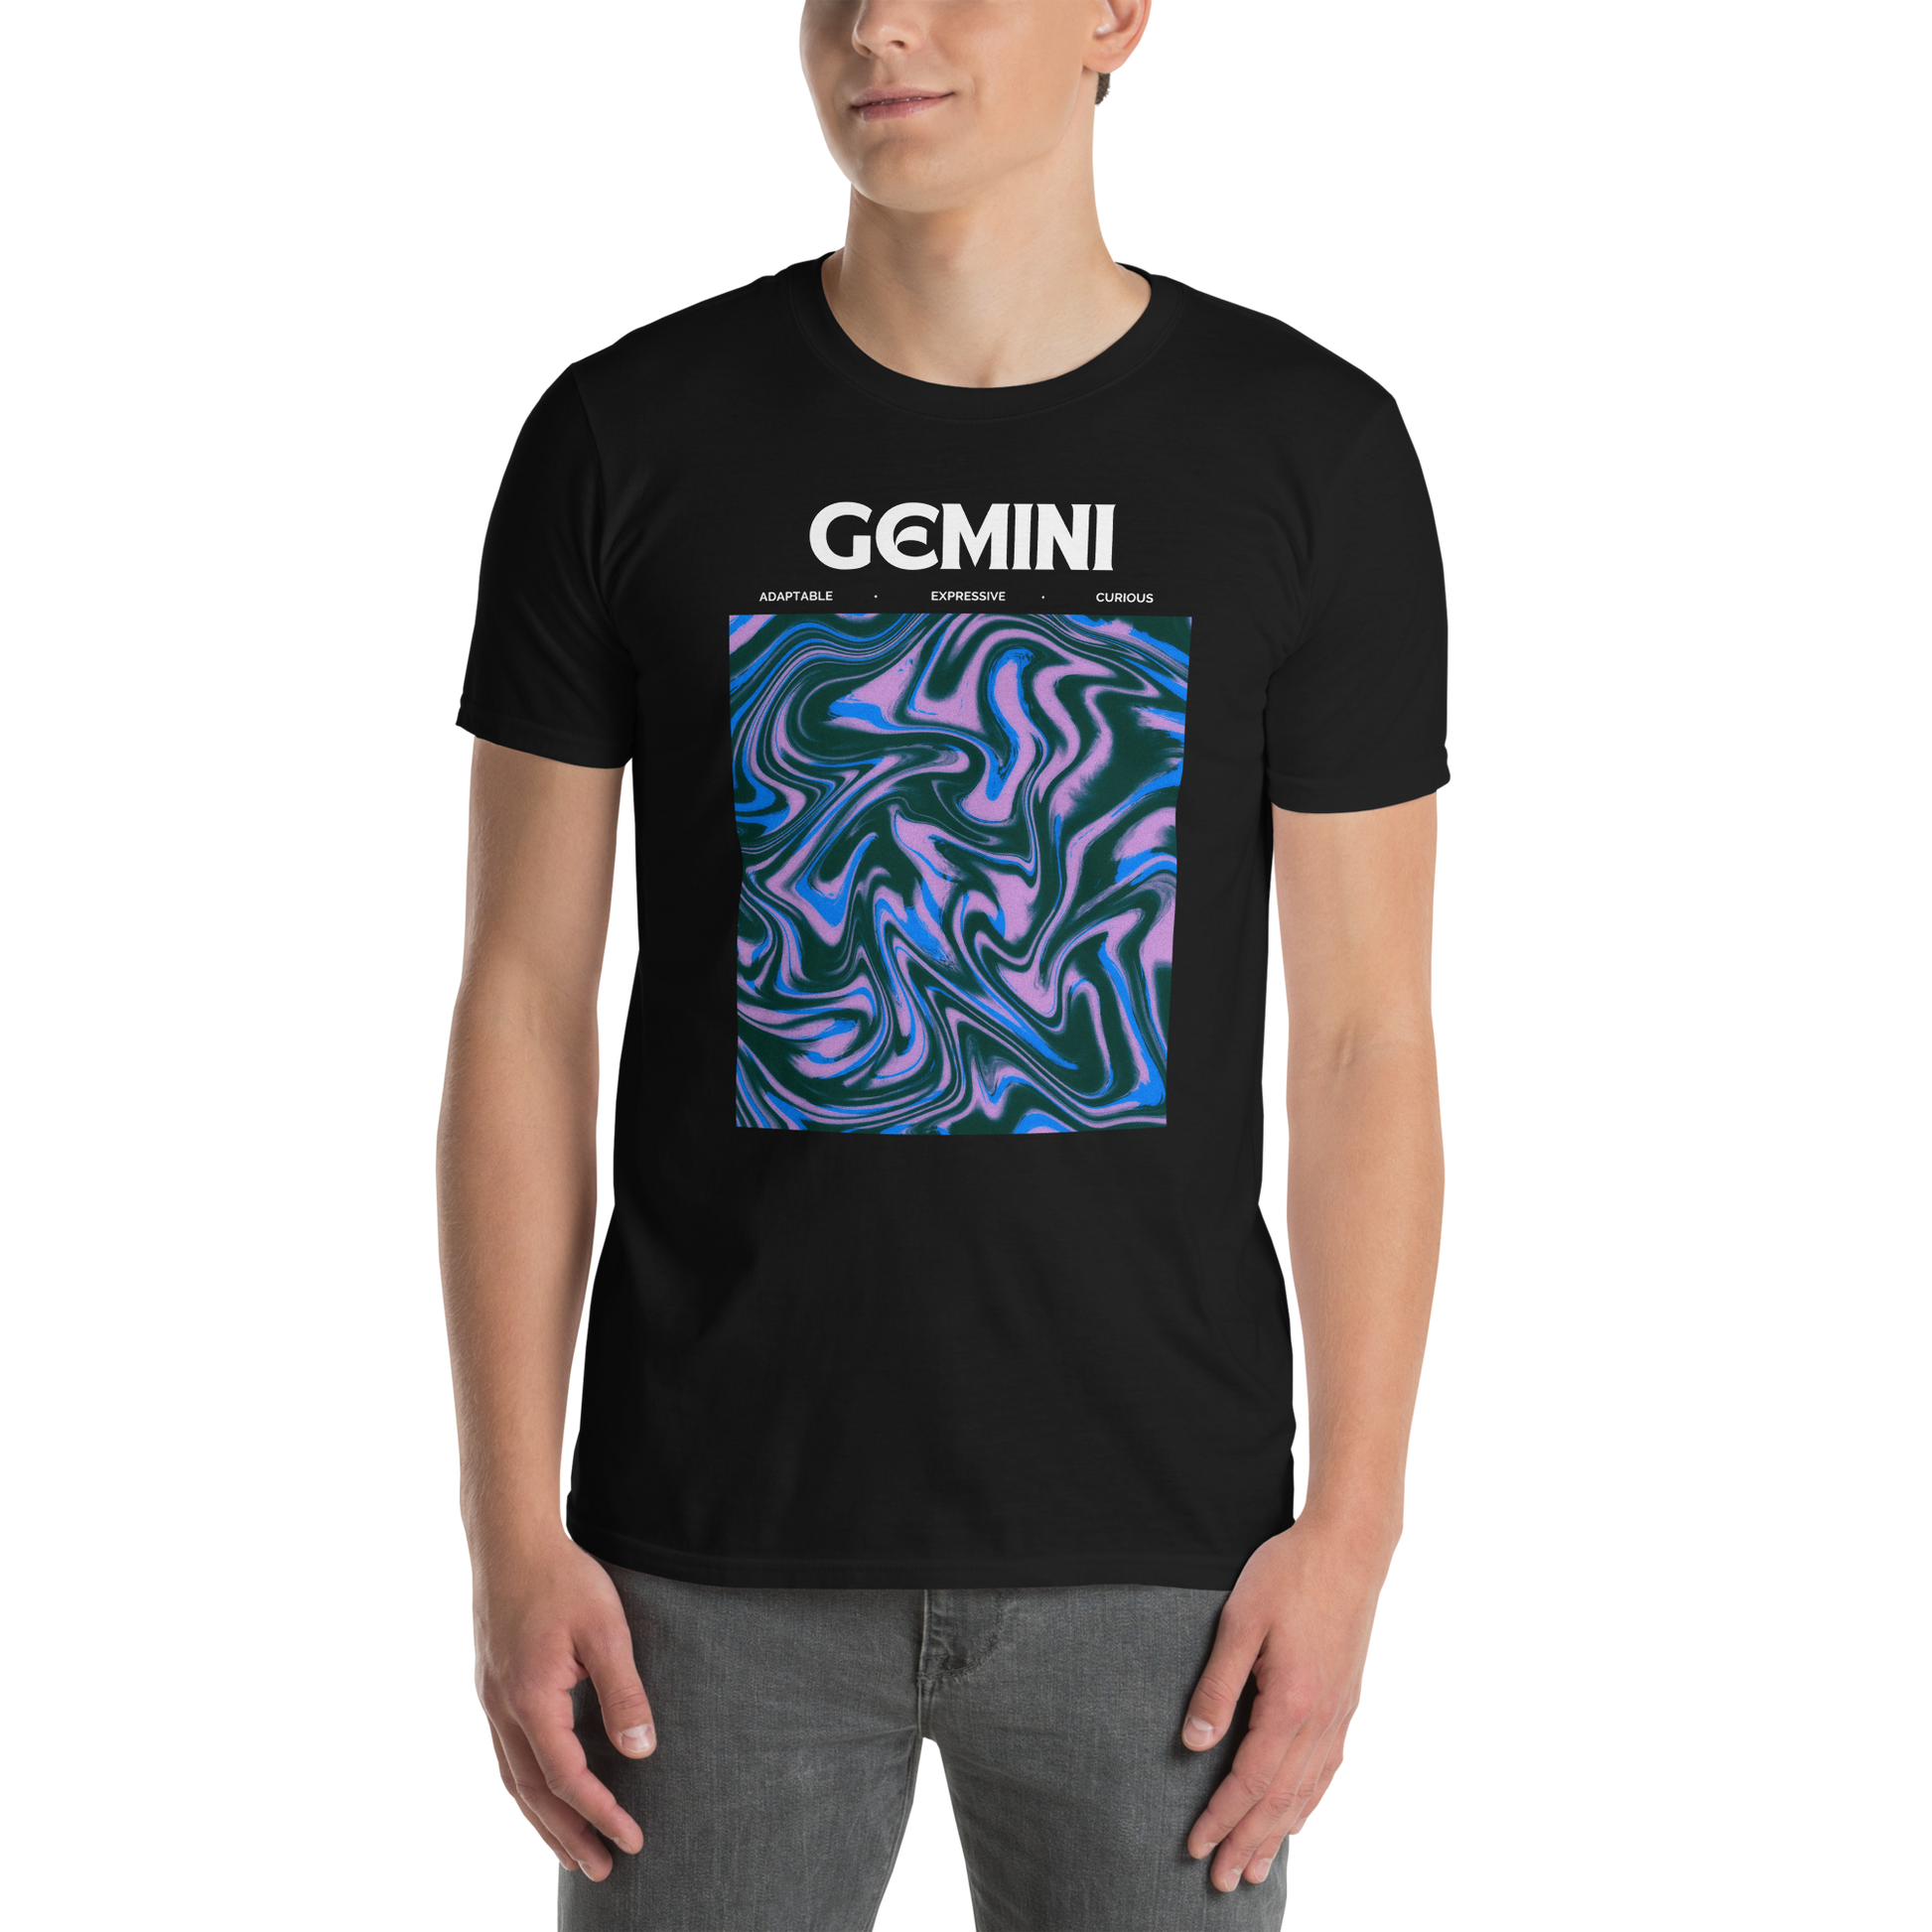 Man wearing a Black Gemini T-Shirt featuring an Abstract Gemini Star Sign graphic on the chest - Cool Graphic Zodiac T-Shirts - Boozy Fox